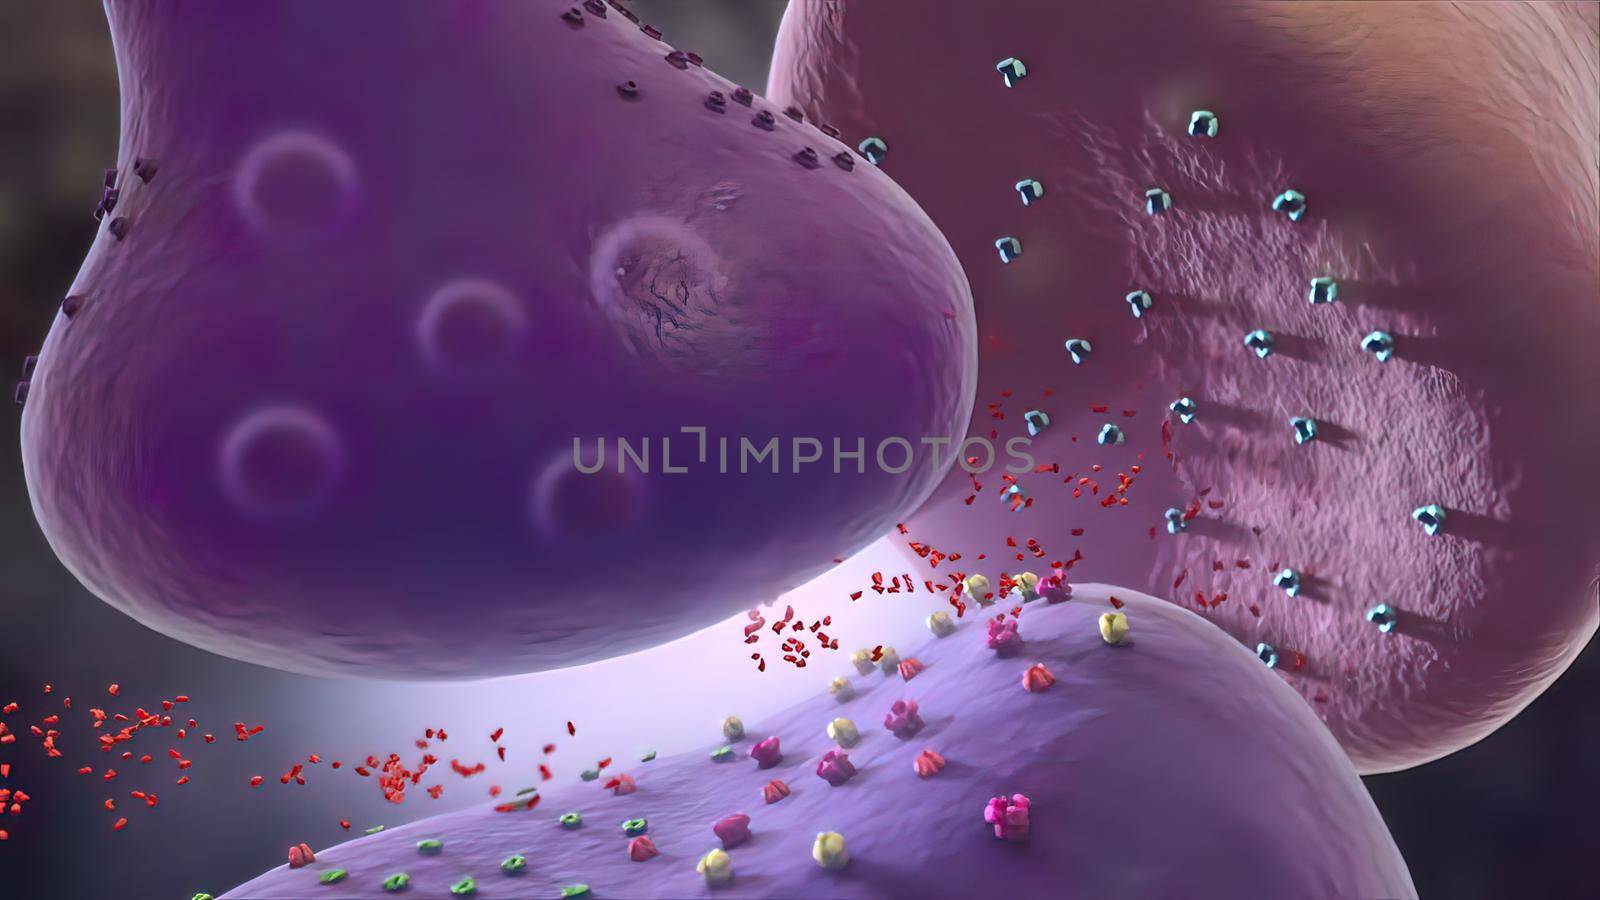 Glial cells of the nervous system release transmitters to release neuronal and synaptic activities. by creativepic